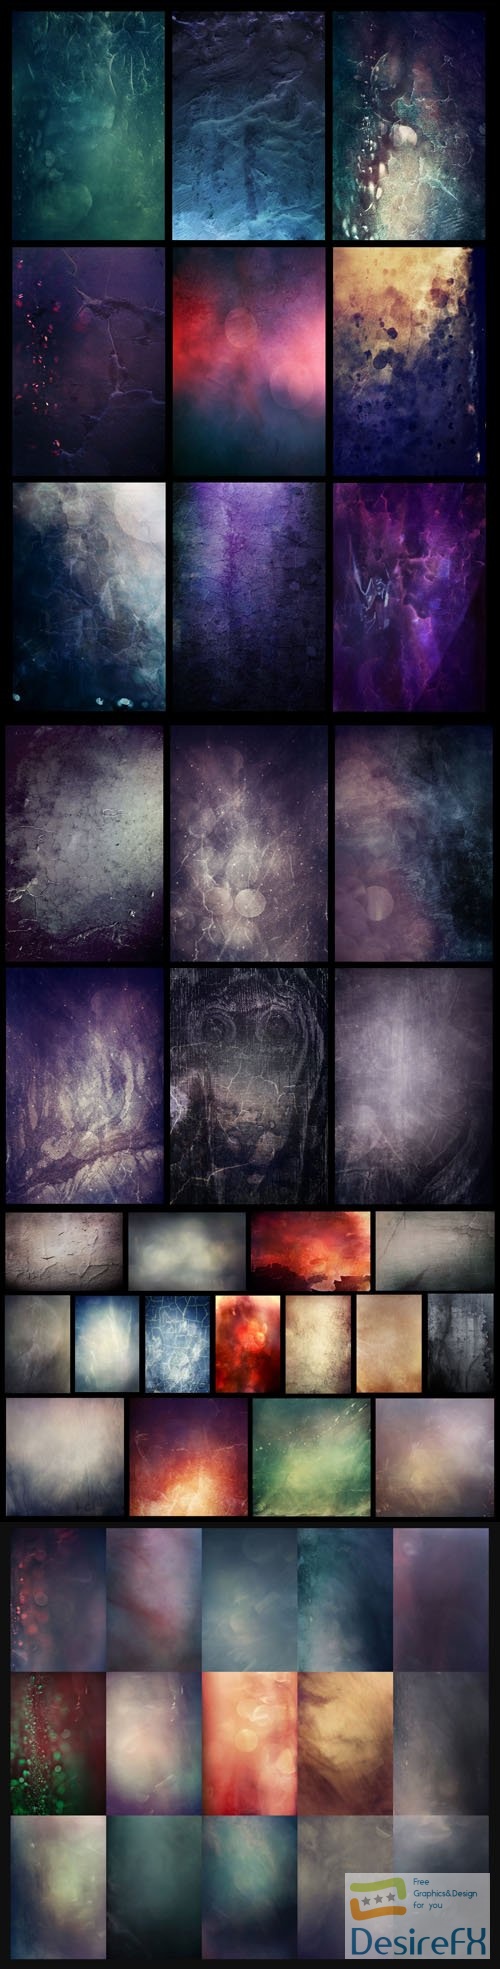 Download 45 Awesome Abstract Textures Pack - DesireFX.COM